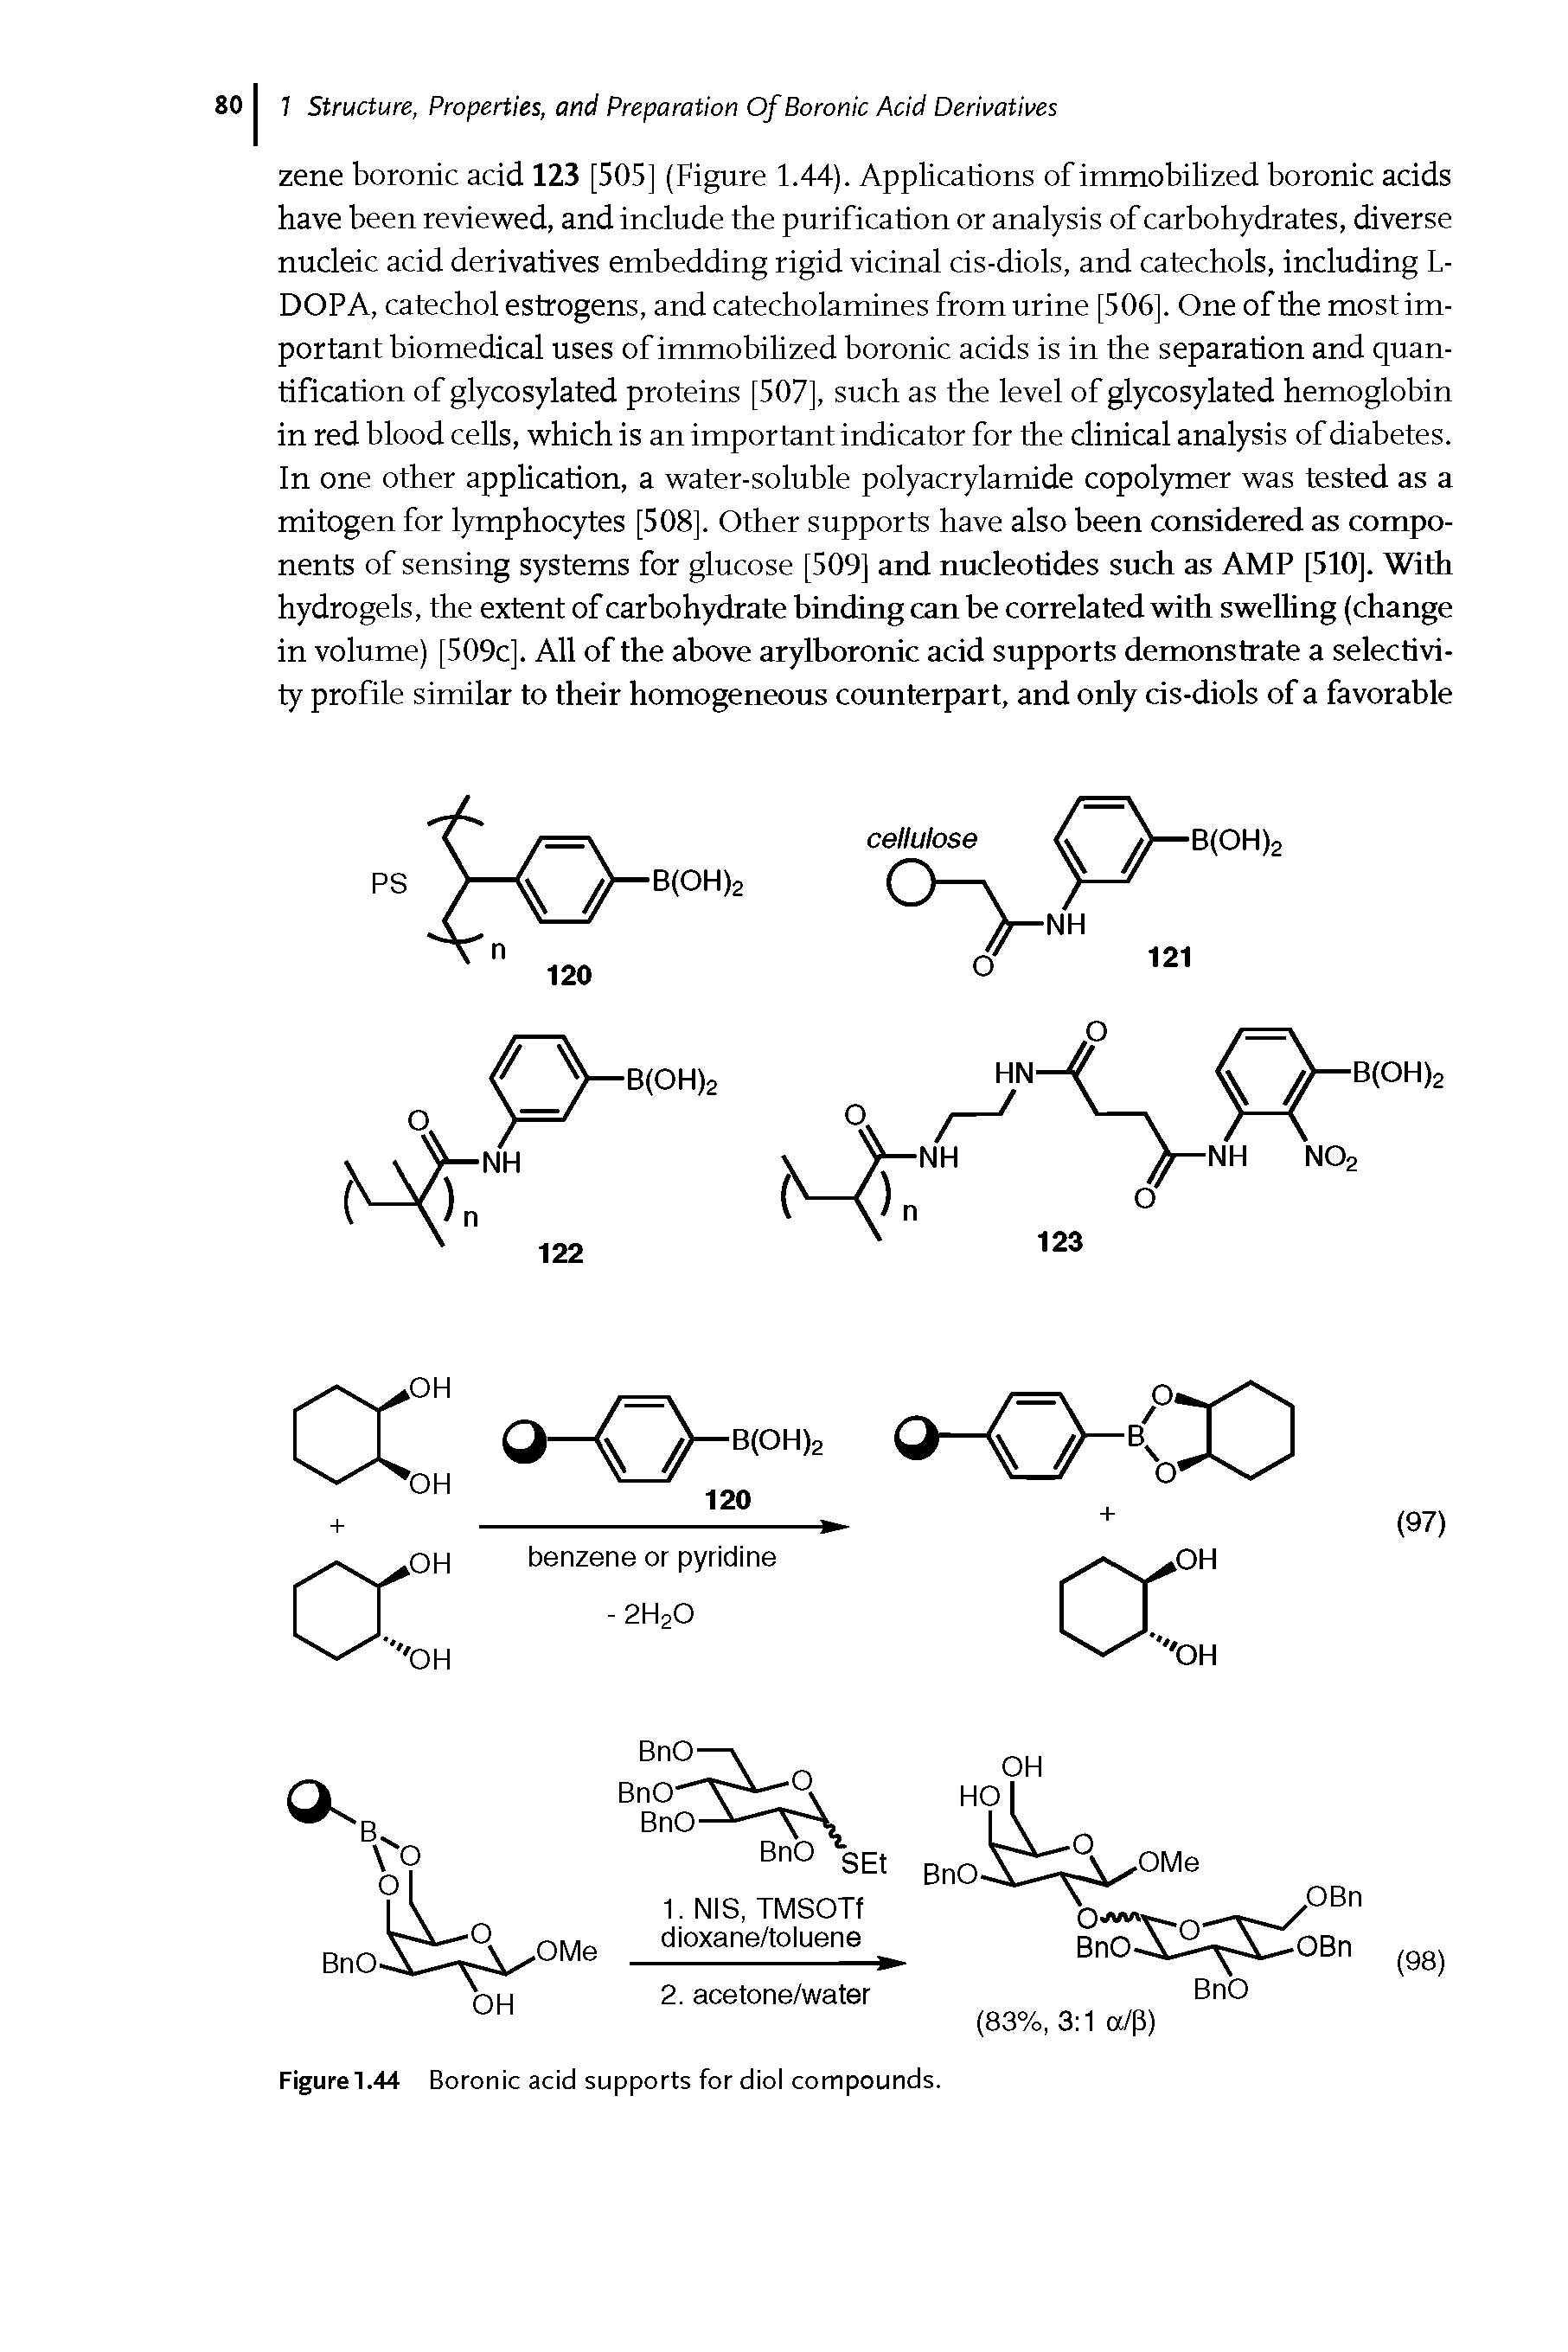 Figure1.44 Boronic acid supports for diol compounds.